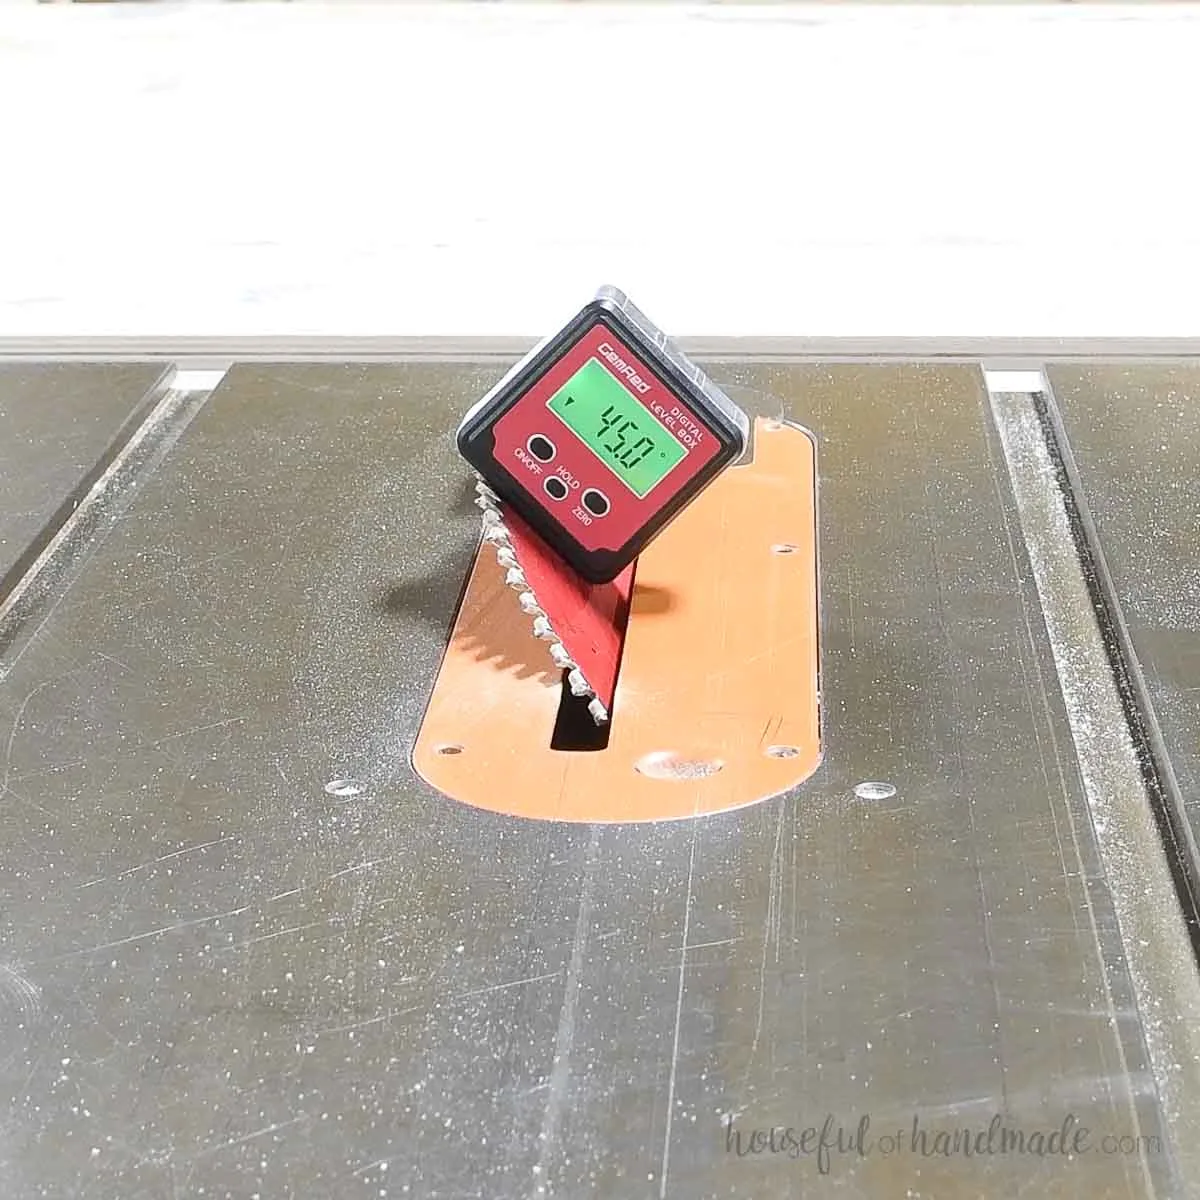 Table saw with blade set to 45 degrees with a digital angle finder. 